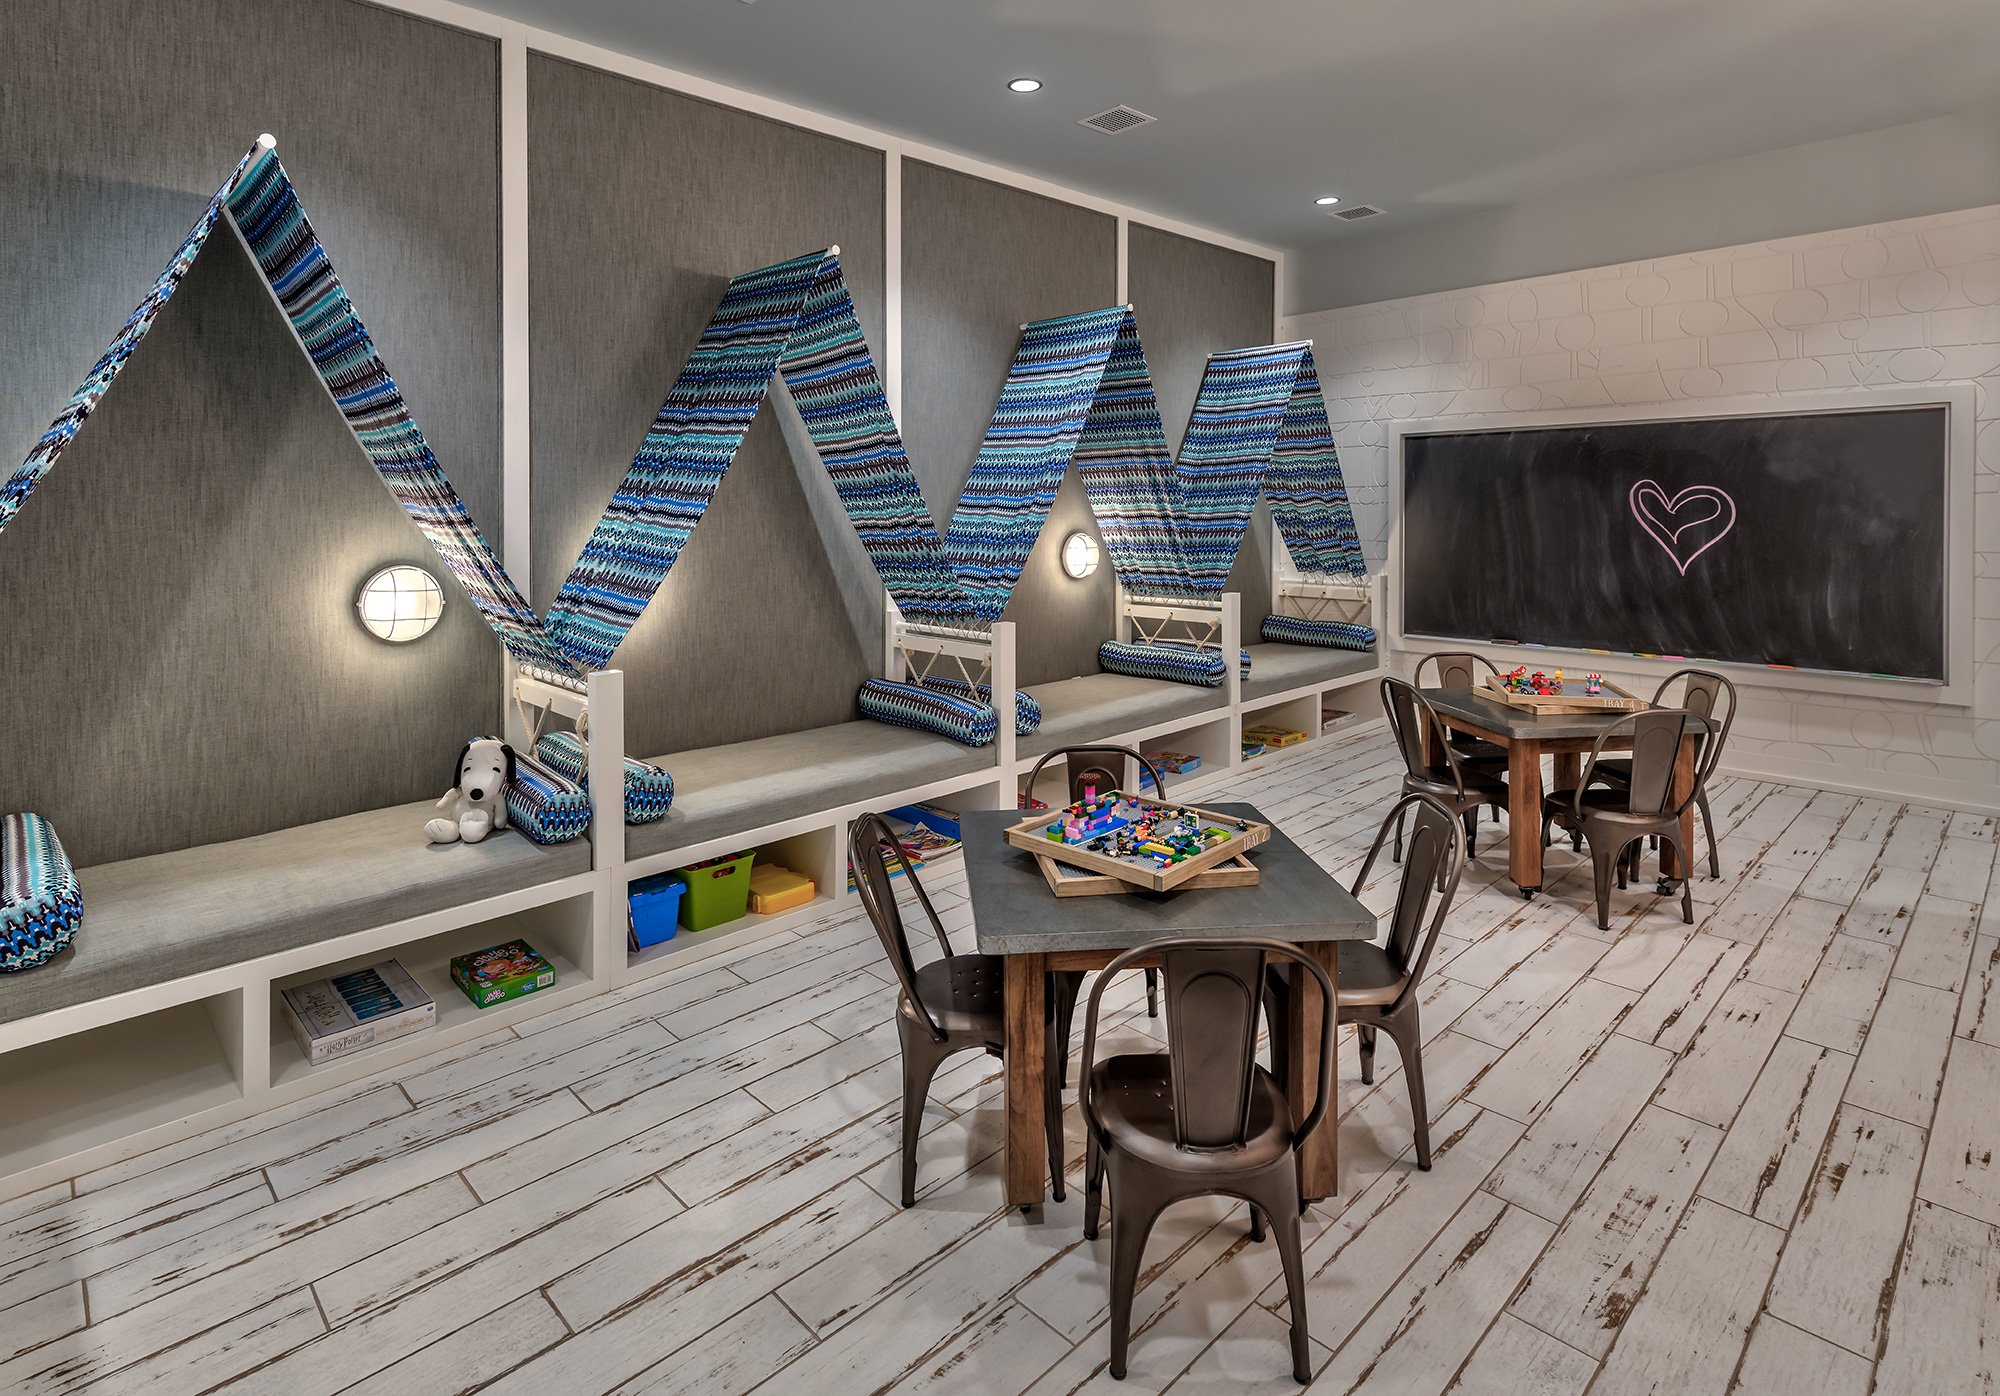   A lively playroom at Tahoe Beach Club is equipped with toys, games, and cheerful decor, providing a fun and engaging space for children. (Copy) (Copy) (Copy)